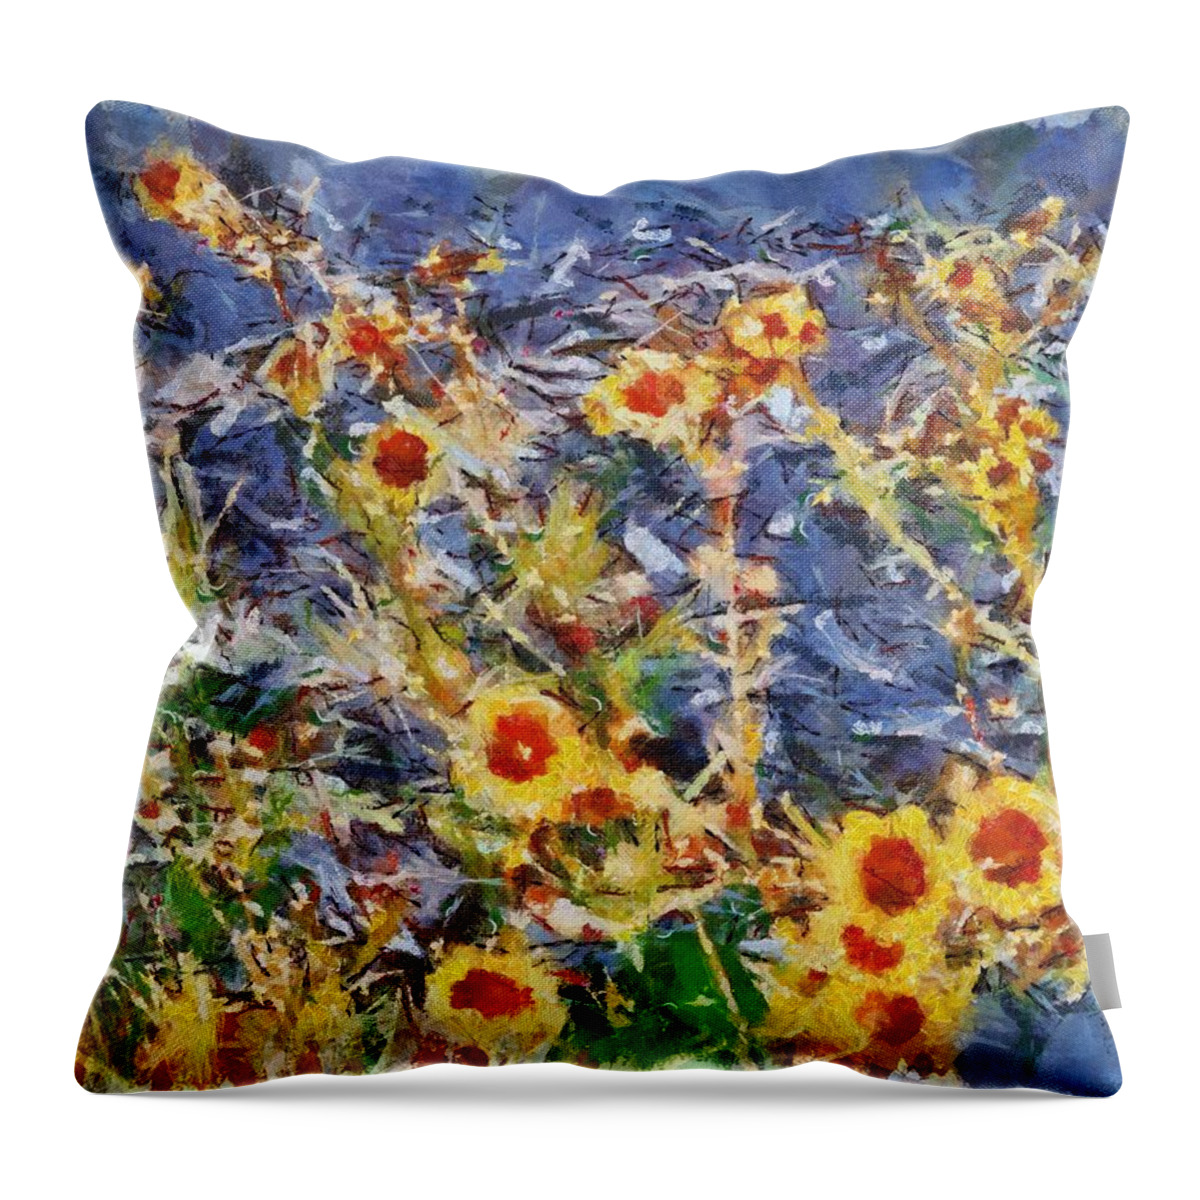 Daisies Throw Pillow featuring the mixed media Daisies by Christopher Reed